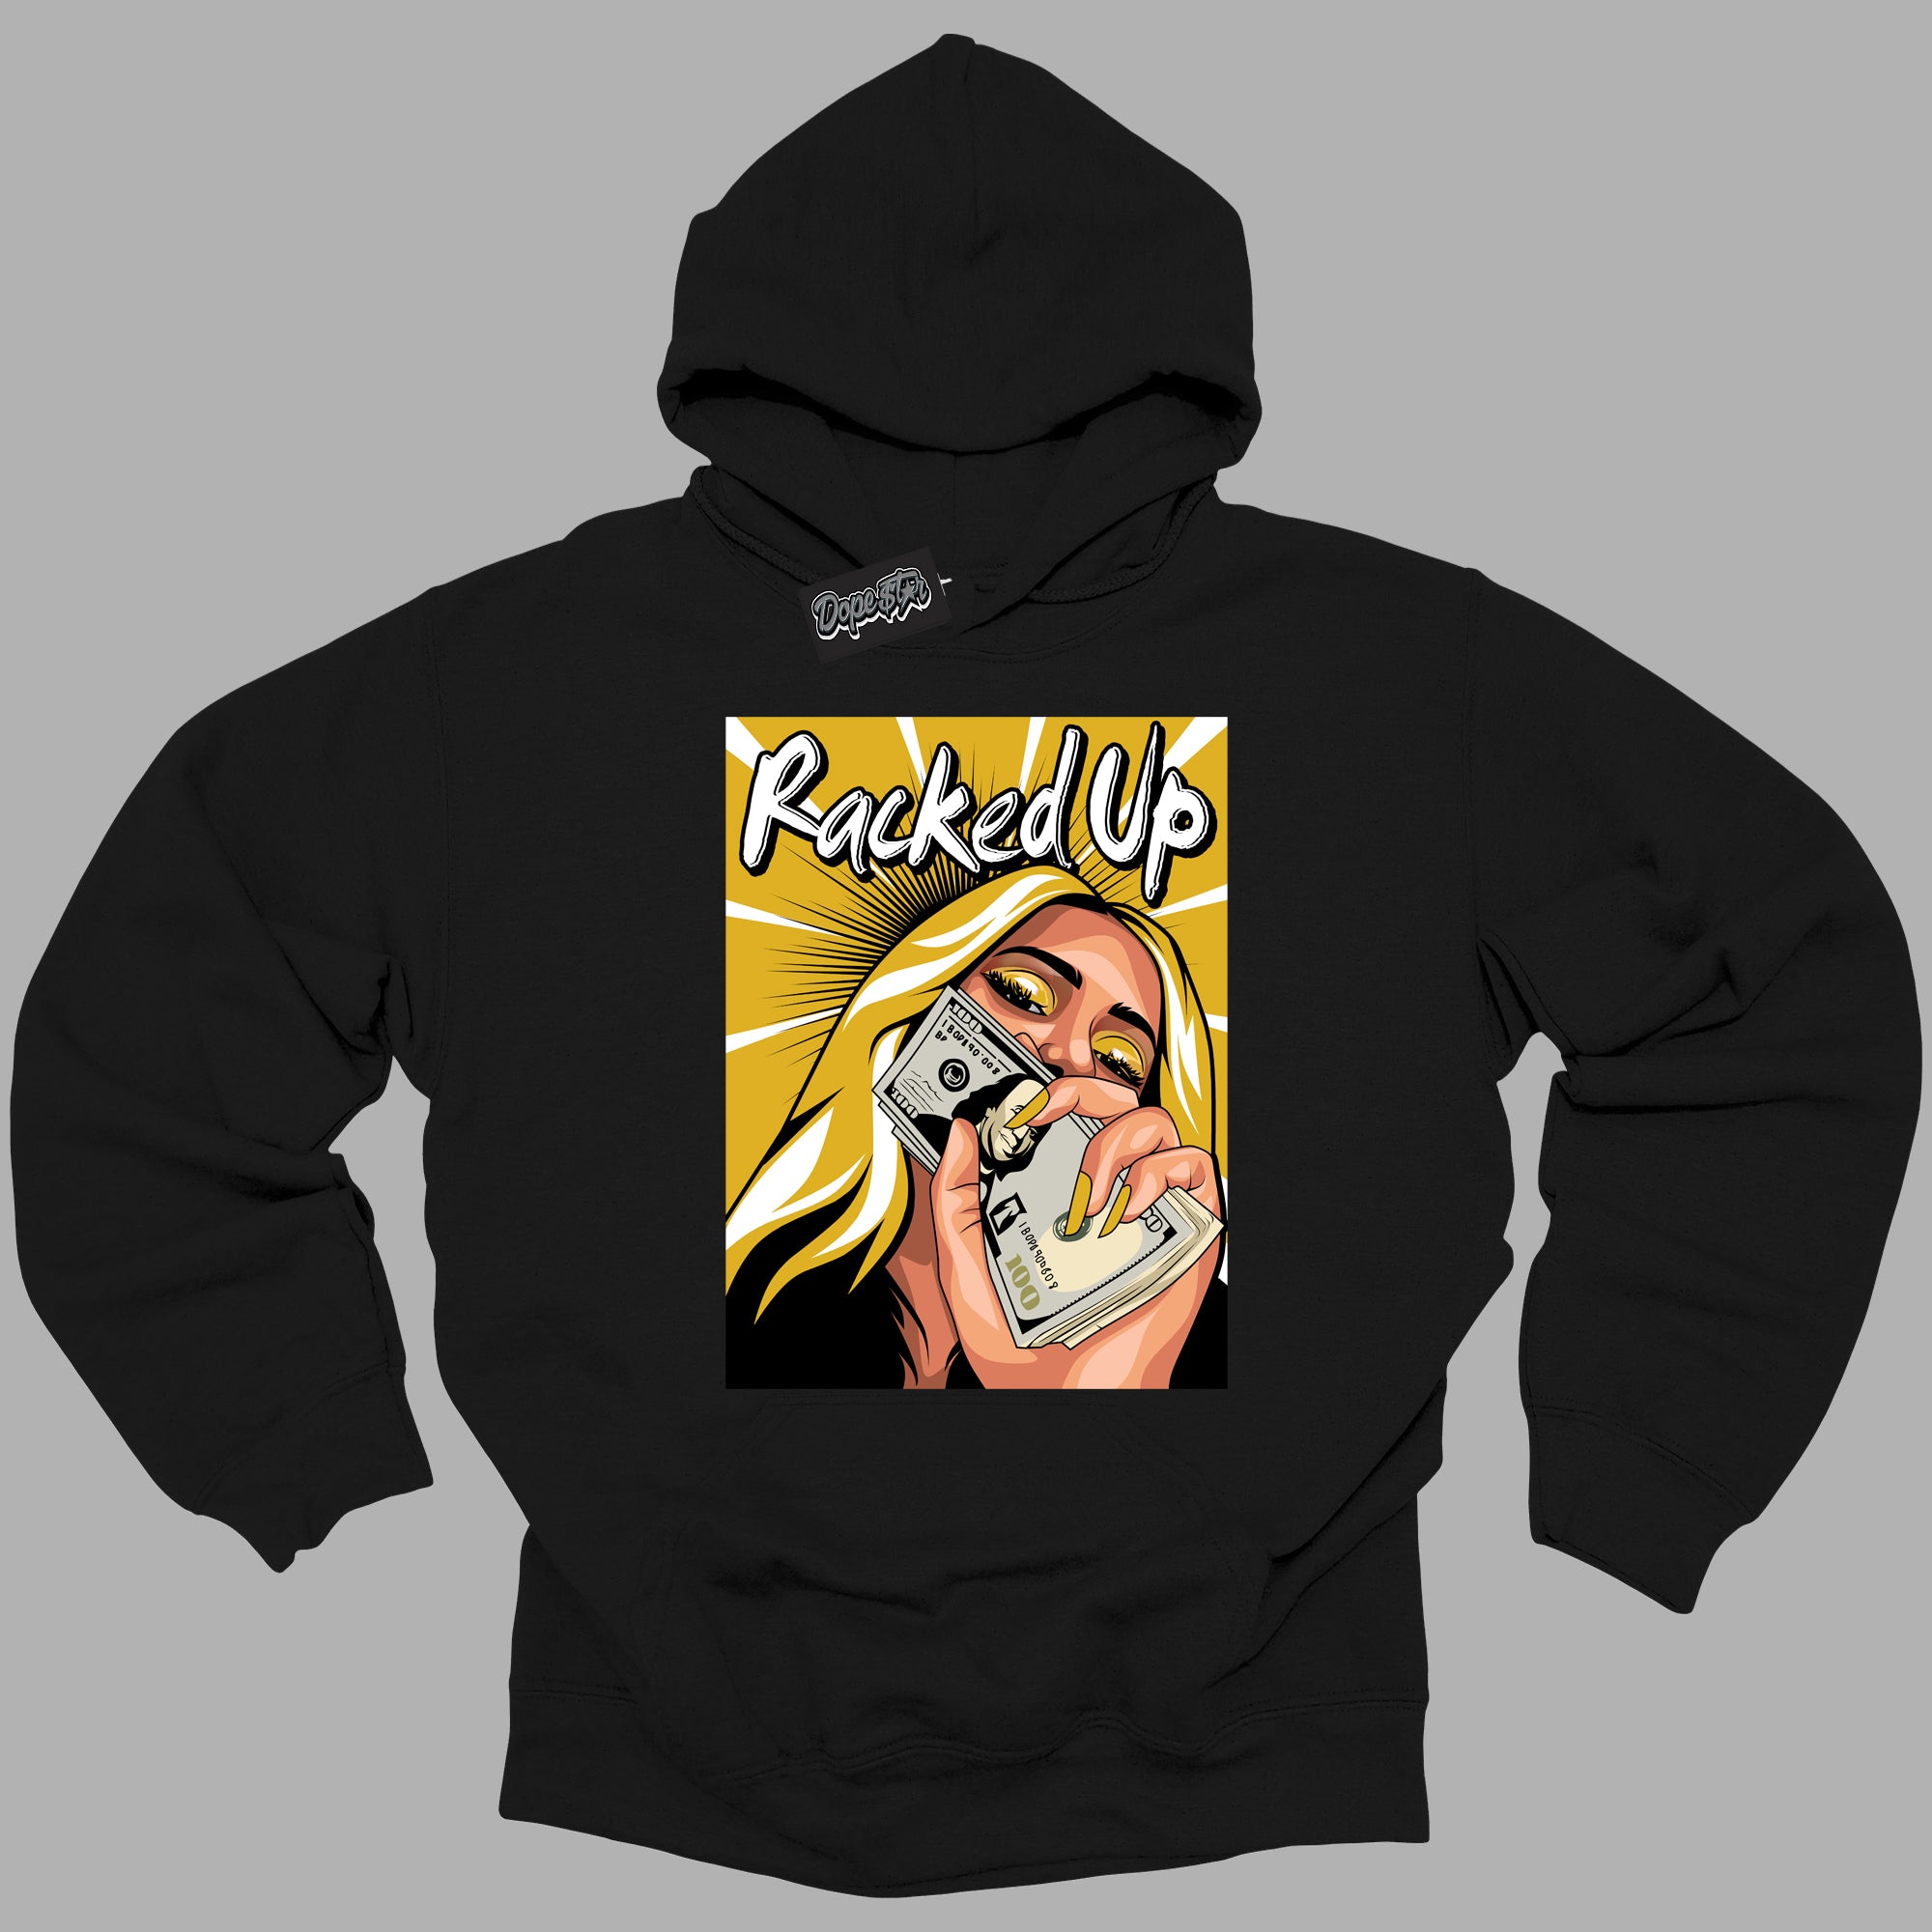 Cool Black Hoodie with “Racked Up ”  design that Perfectly Matches Yellow Ochre 6s Sneakers.